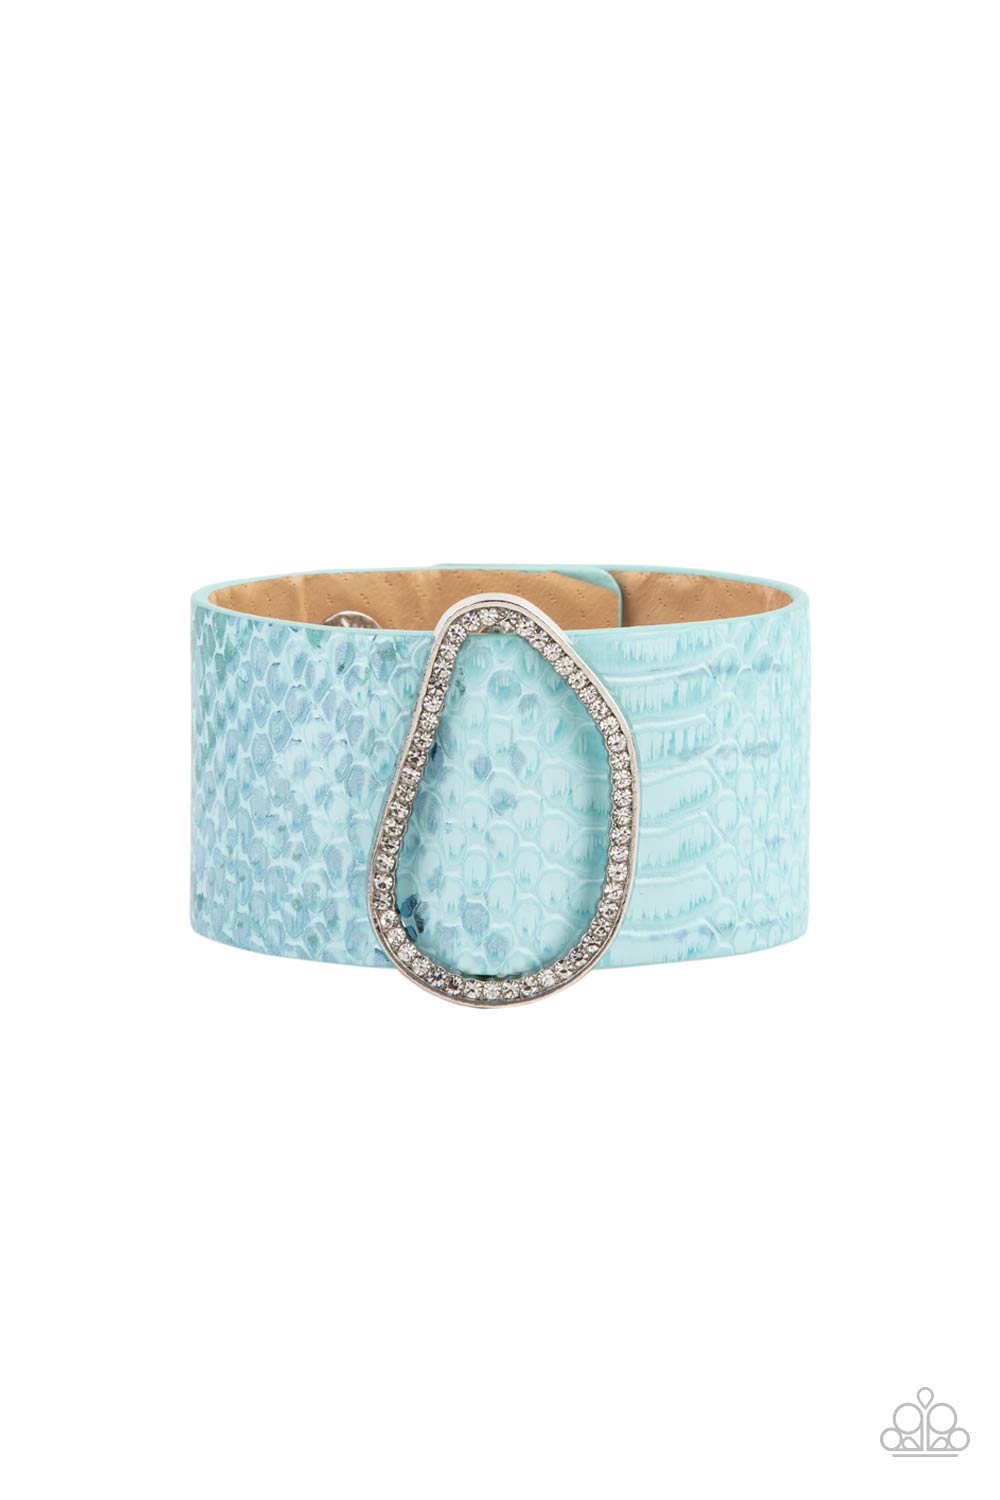 HISS-tory In The Making- Blue Wrap Bracelet- Paparazzi Accessories